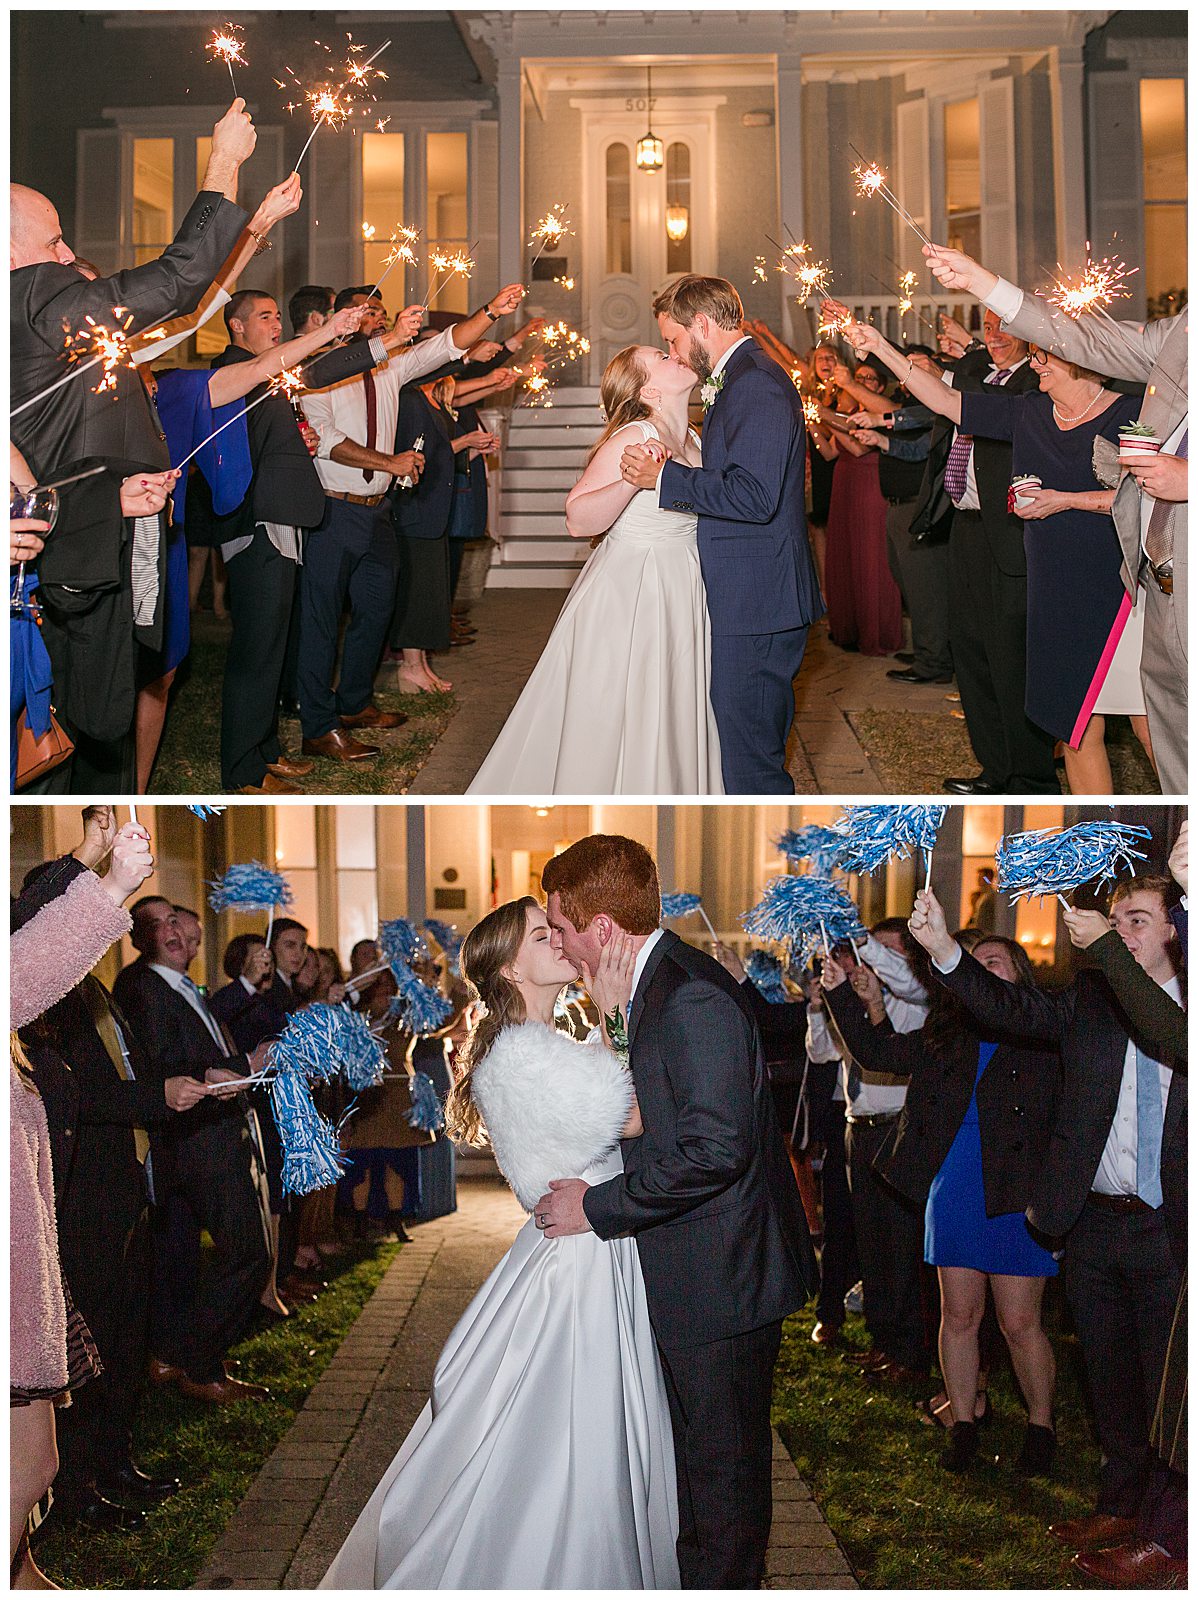 collage with two couples exiting wedding, one in which guests hold up sparklers, second with guests shaking UNC pom poms